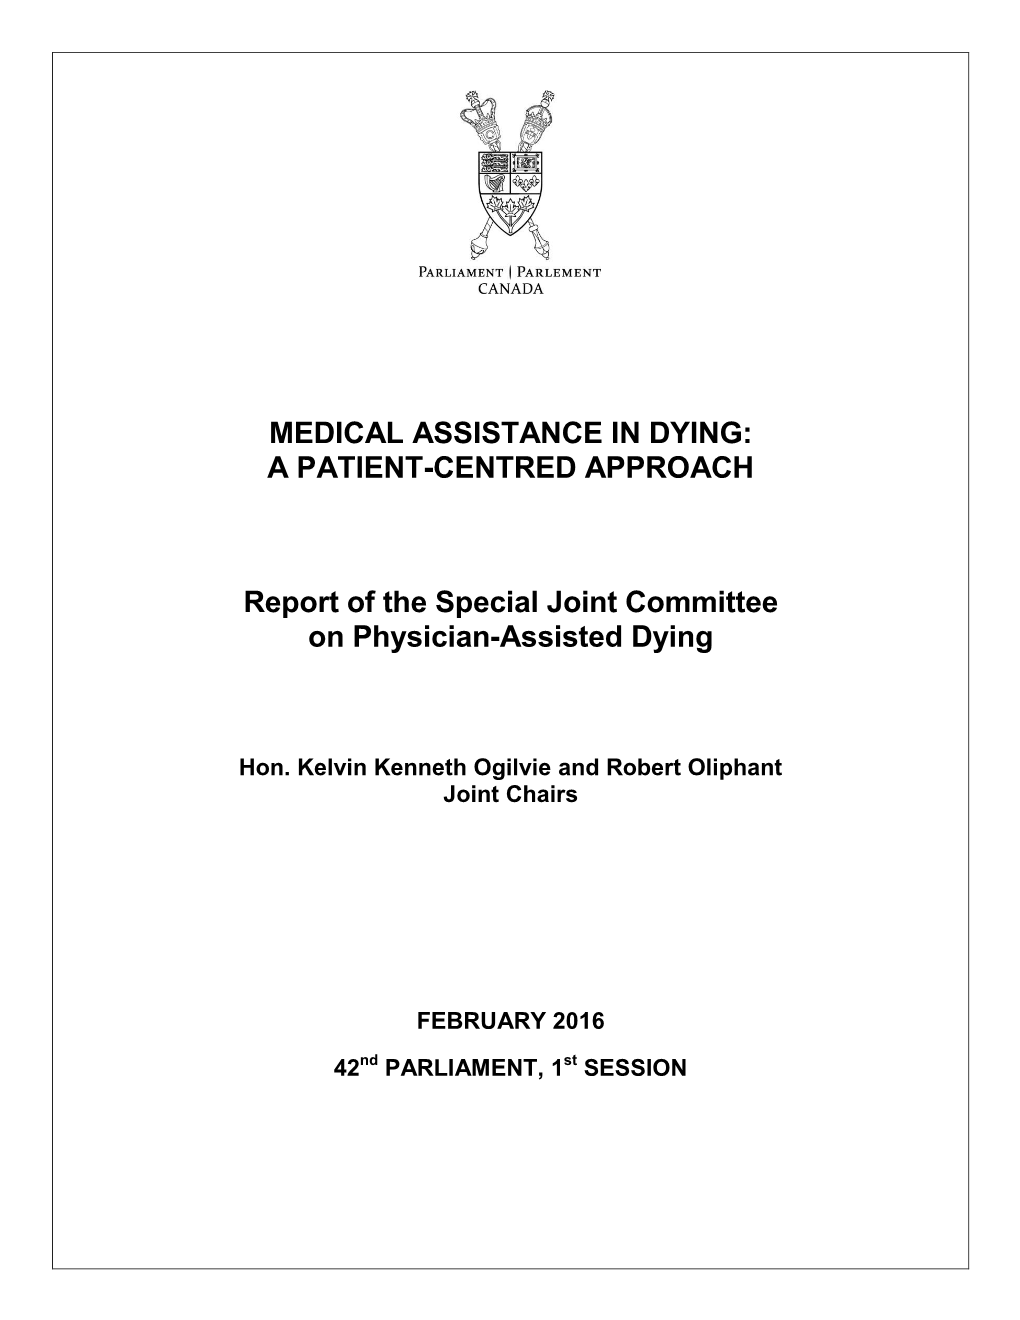 Medical Assistance in Dying: a Patient-Centred Approach